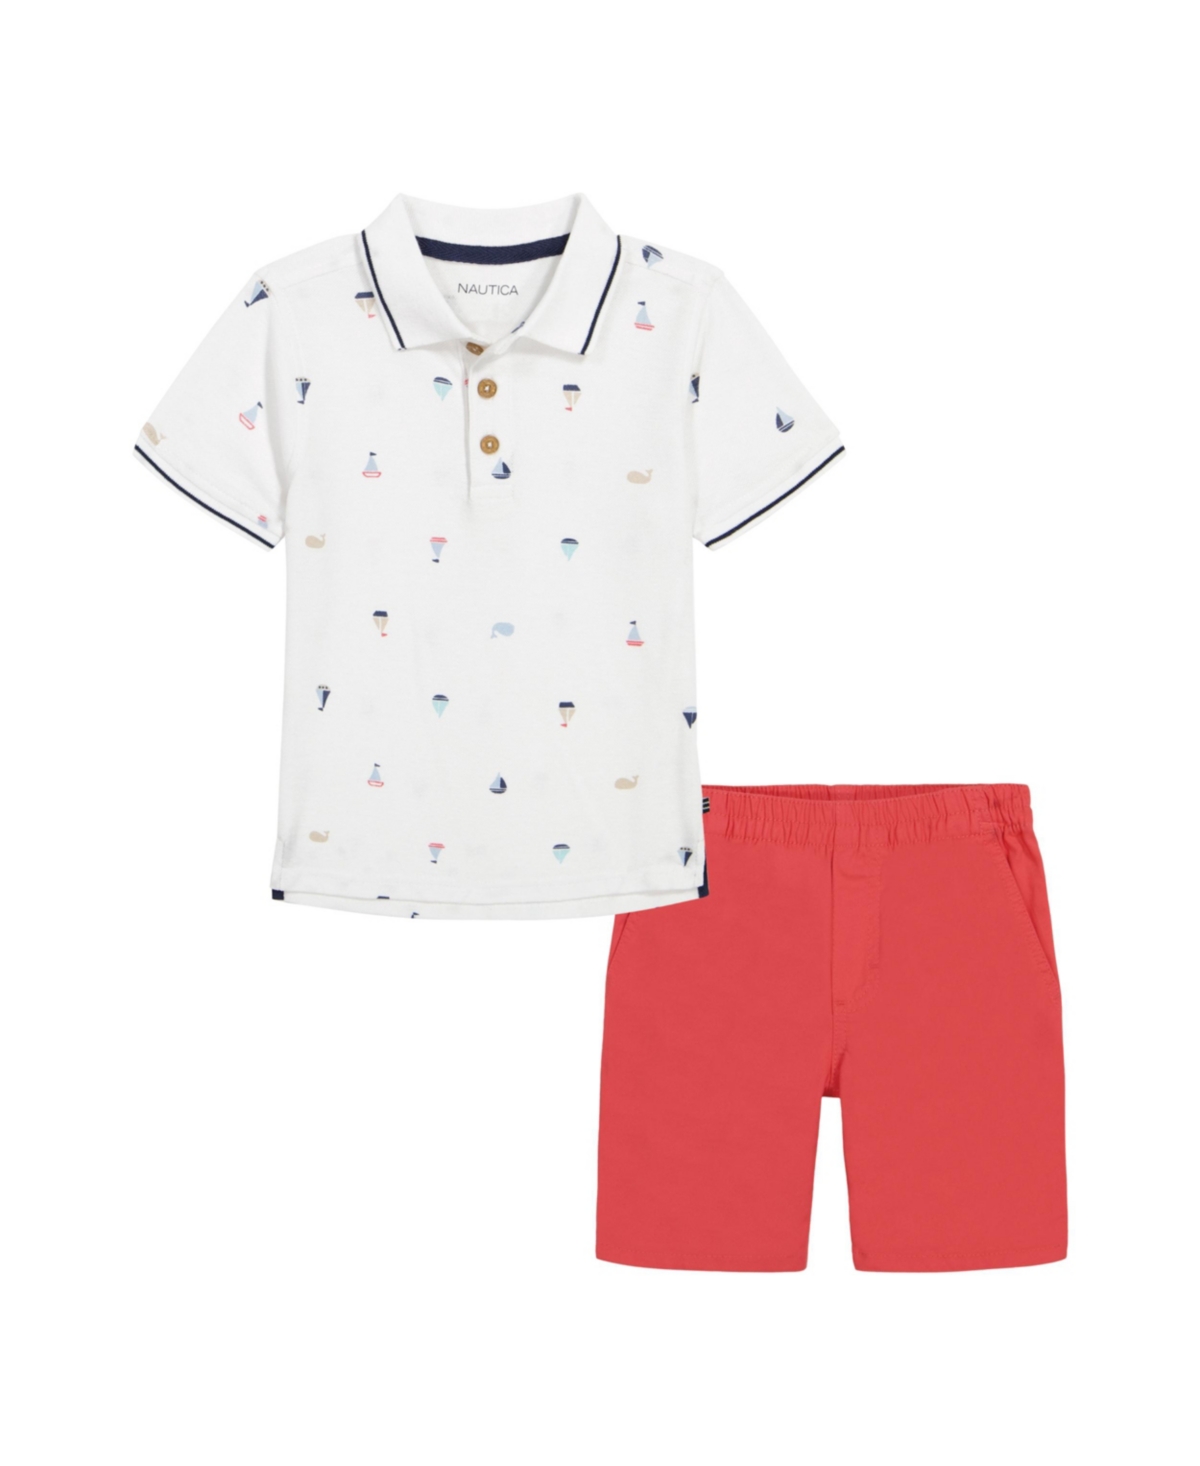 Nautica Kids' Little Boys Printed Pique Polo Shirt And Prewashed Twill Shorts, 2 Pc Set In White Print